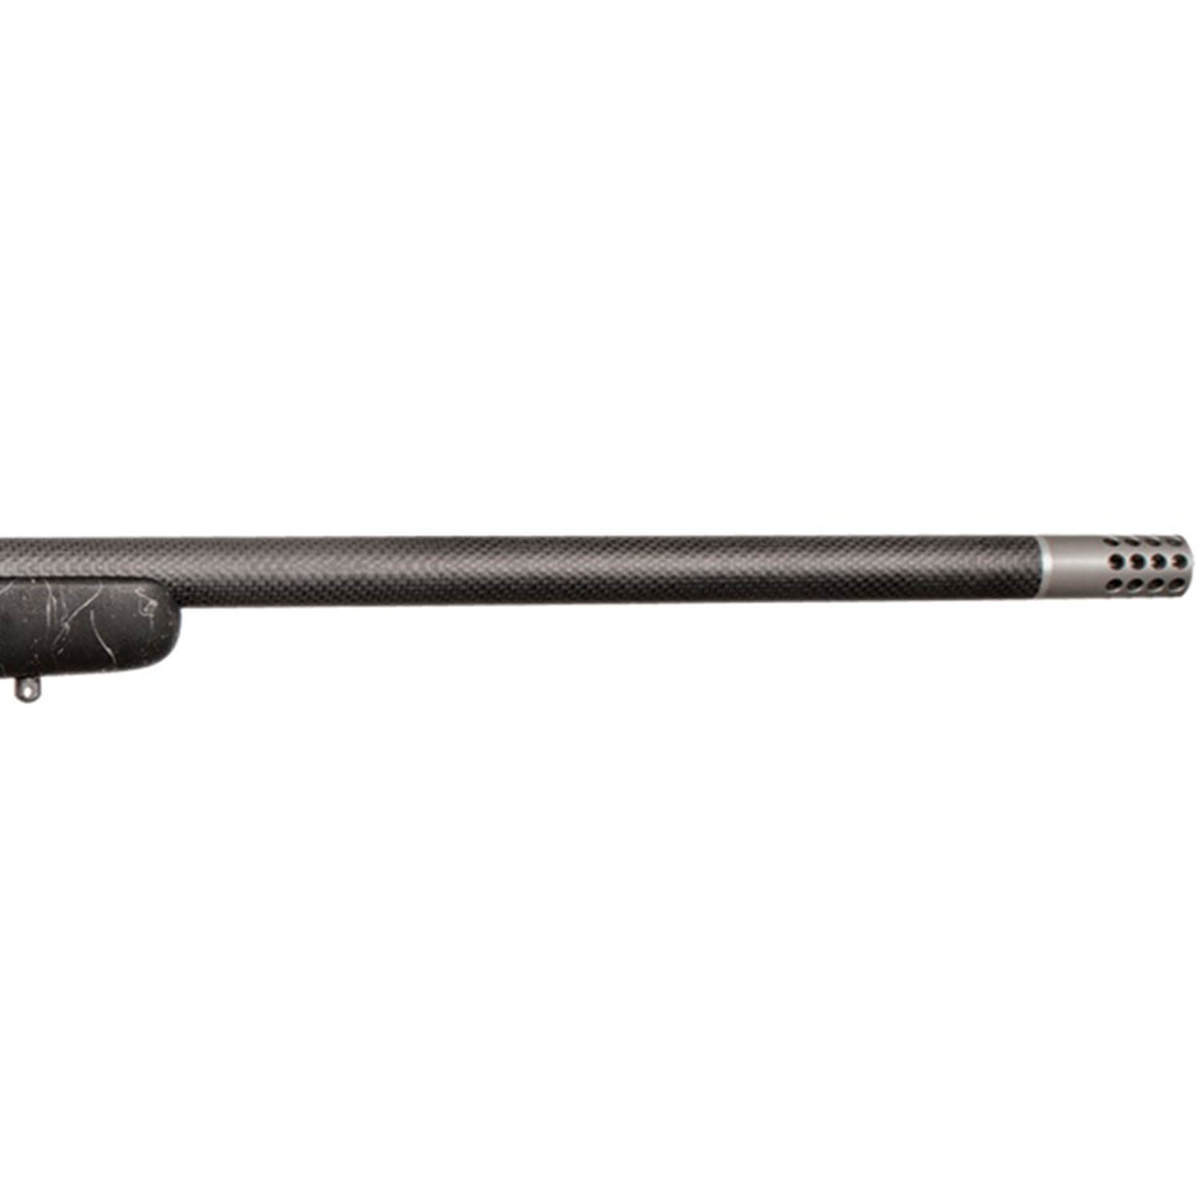 christiansen arms ridgeline stainlessblack with gray webbing bolt action rifle 65 284 norma 26in 1677238 5